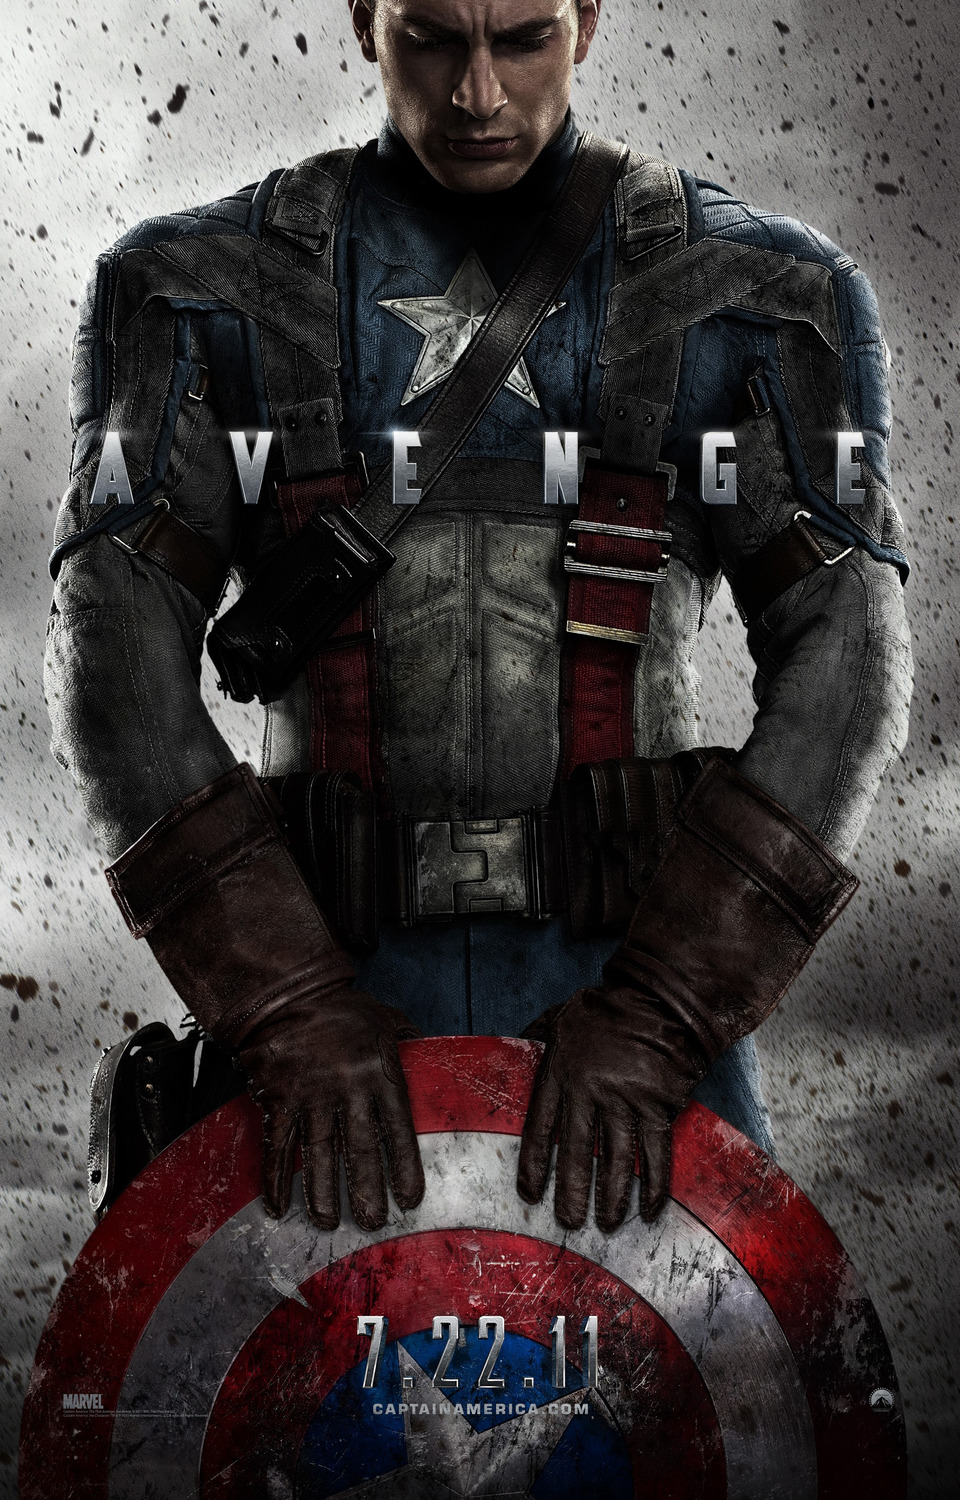 Extra Large Movie Poster Image for Captain America: The First Avenger